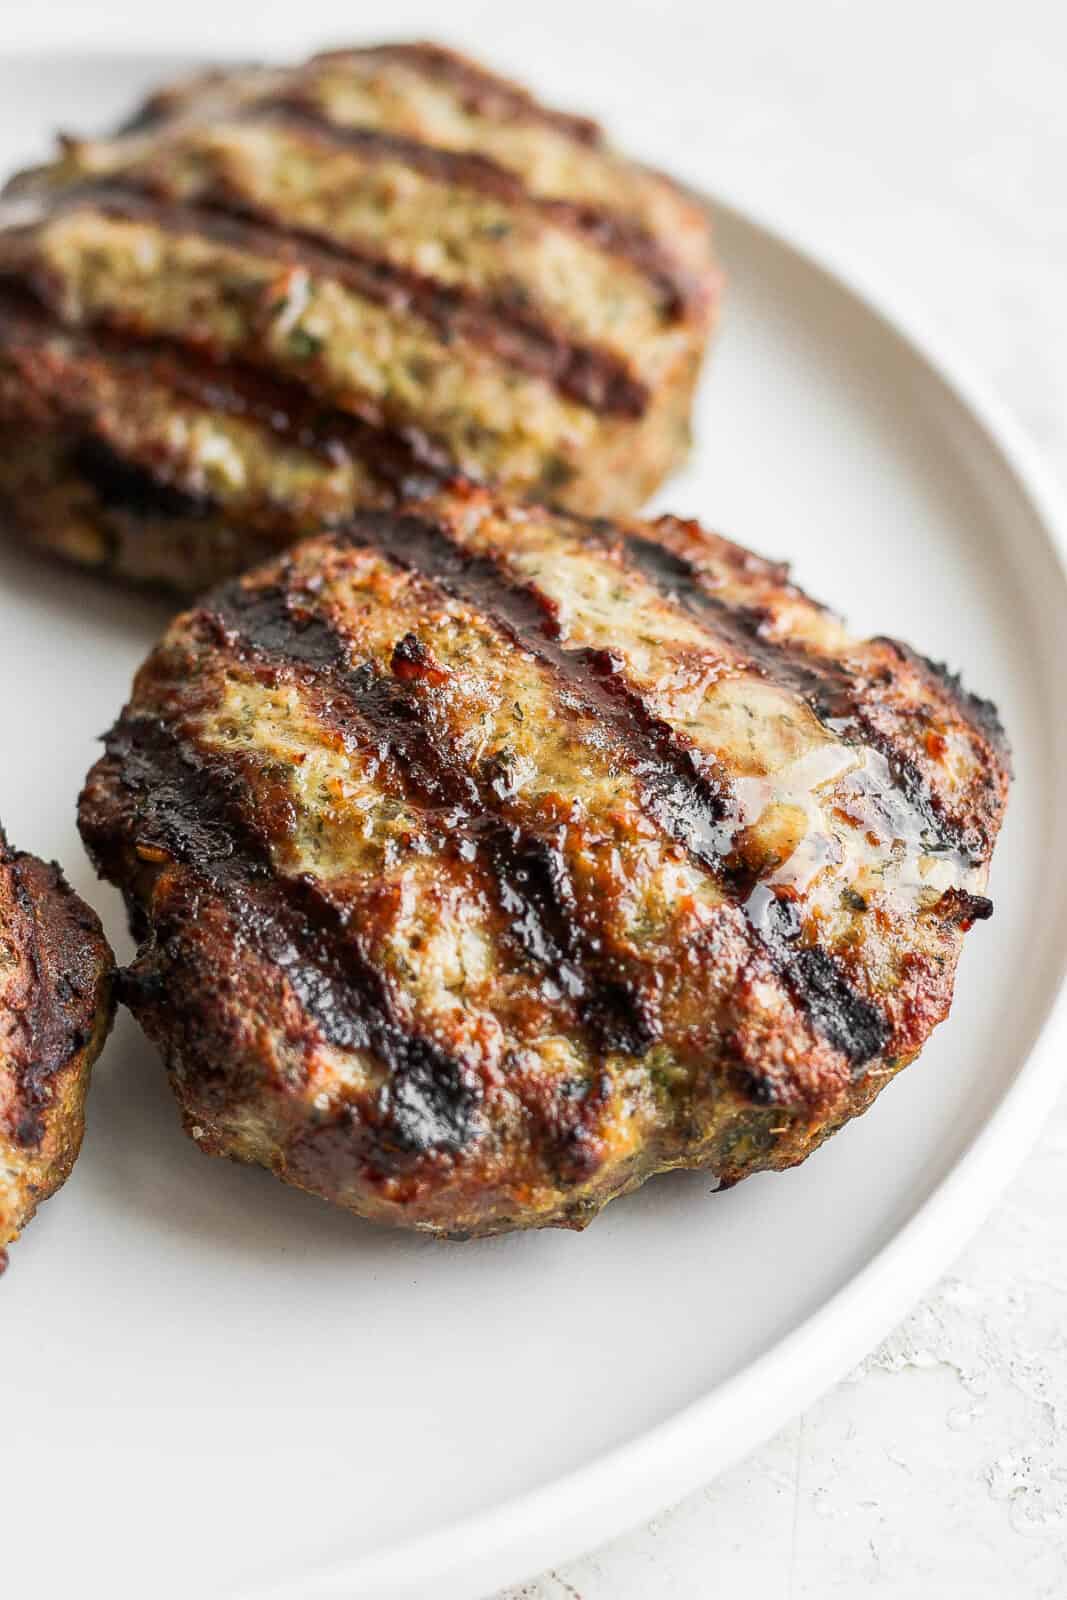 Grilled lamb burger patties on a plate.